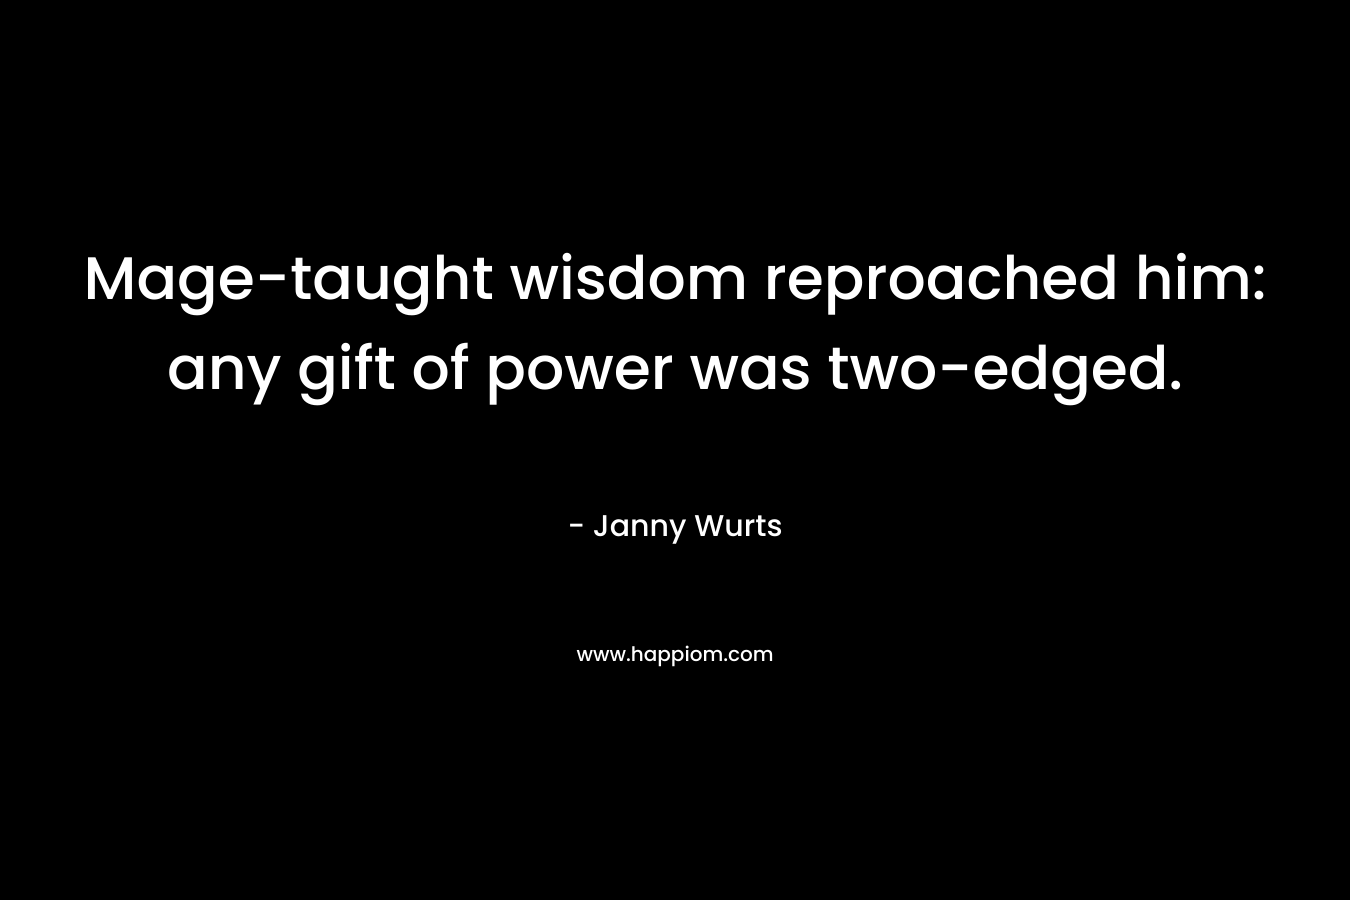 Mage-taught wisdom reproached him: any gift of power was two-edged. – Janny Wurts